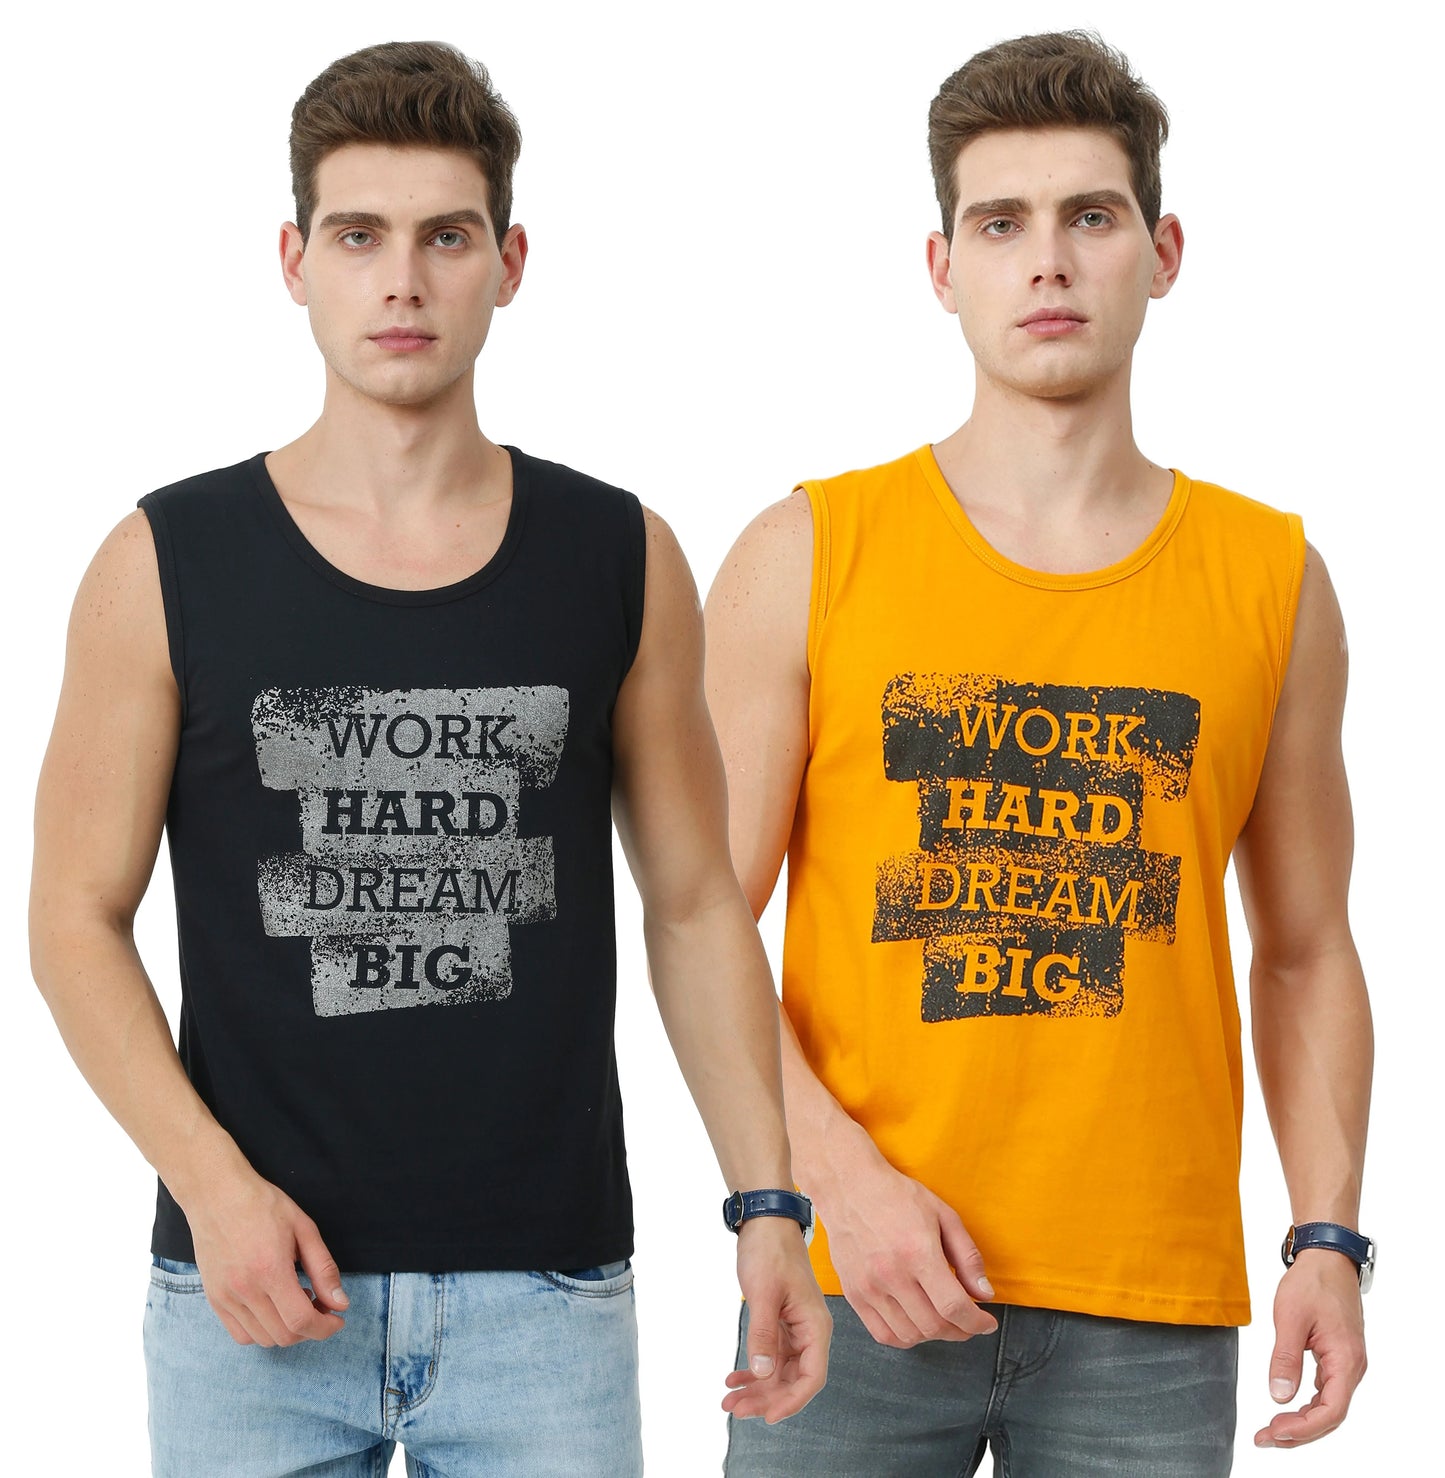 Fleximaa Men's Cotton Printed Round Neck Sleeveless T-Shirt (Pack of 2) - fleximaa-so